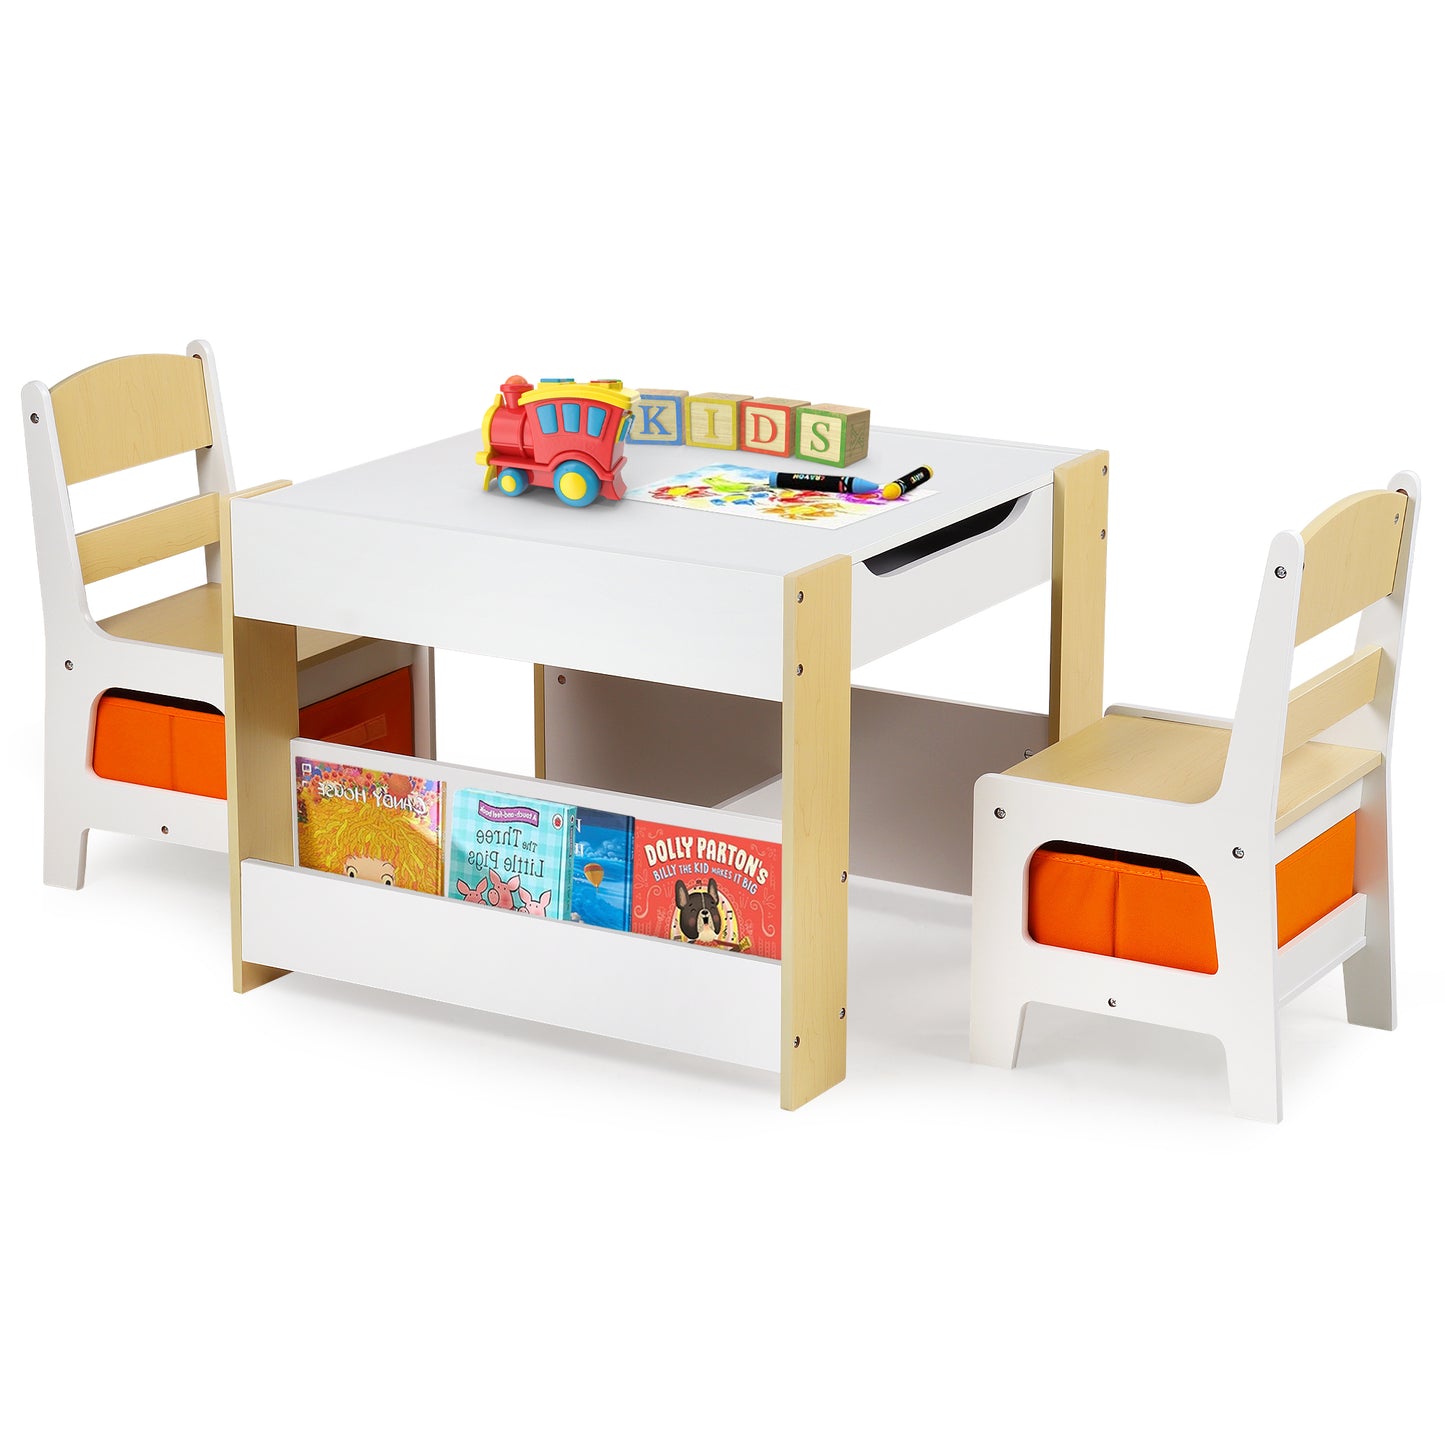 4 in 1 Kids Wood Table & 2 Chairs Set, Children Activity Table Toddler w/Storage, Natural